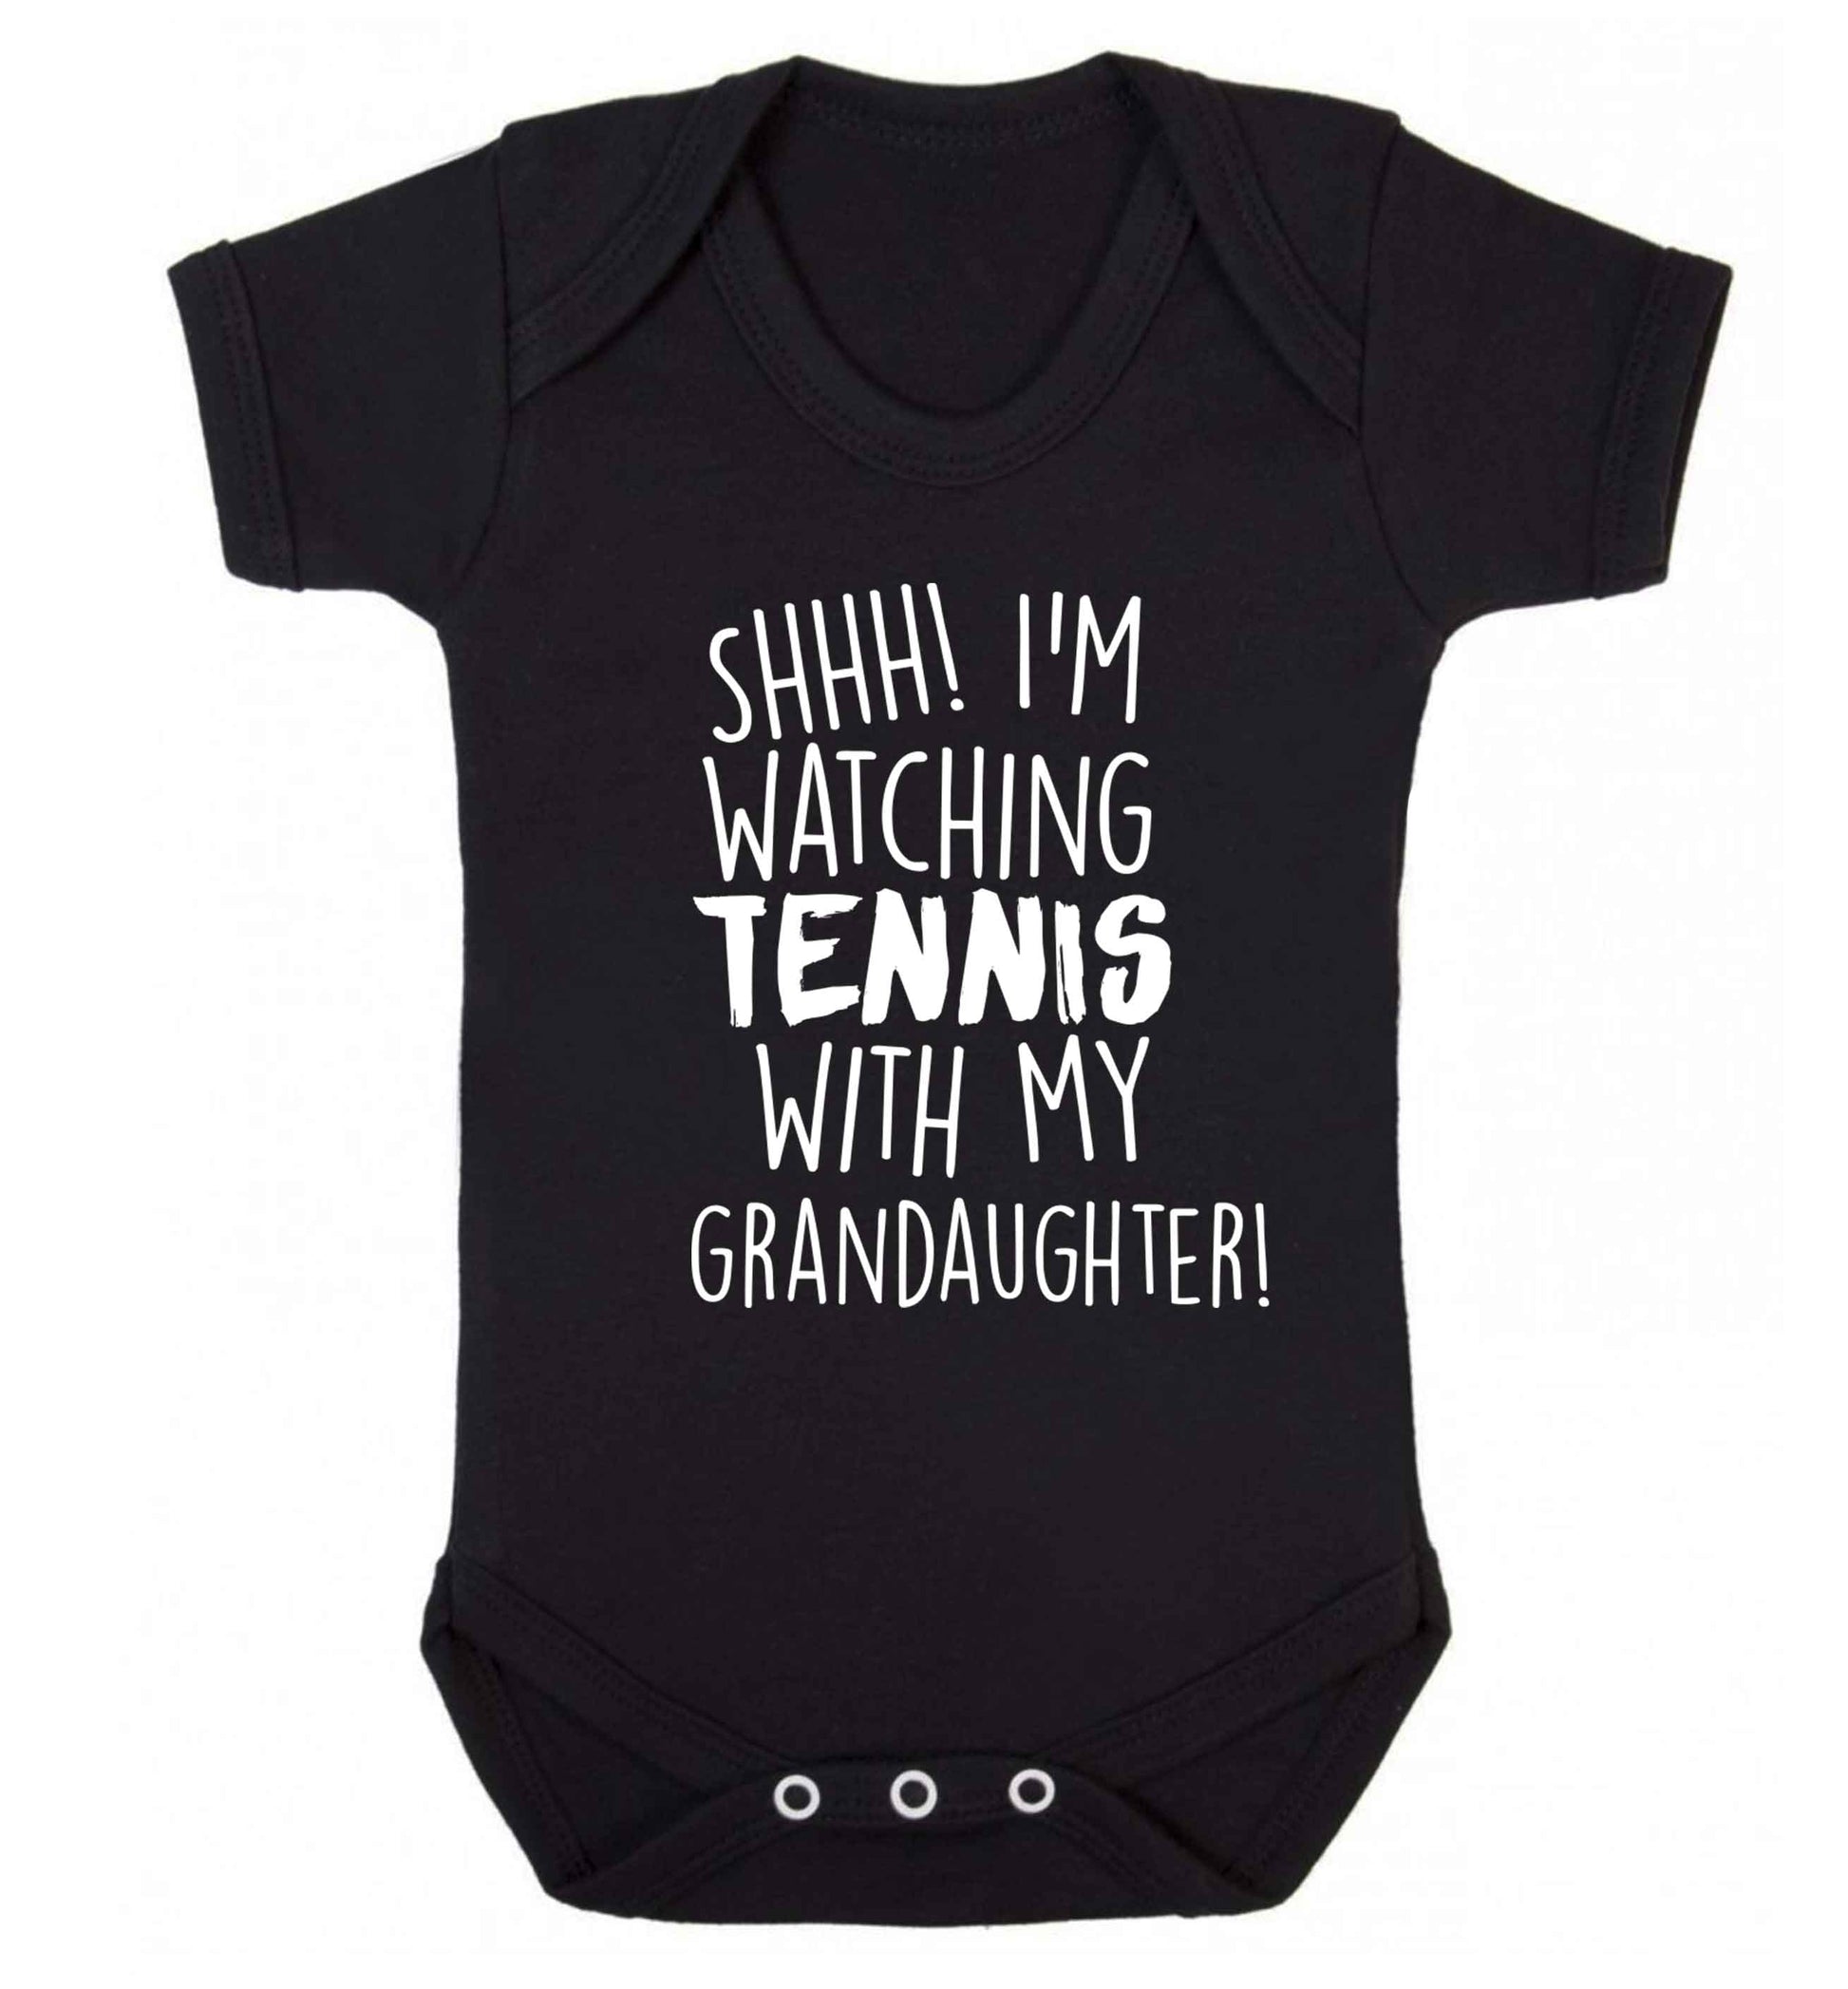 Shh! I'm watching tennis with my granddaughter! Baby Vest black 18-24 months